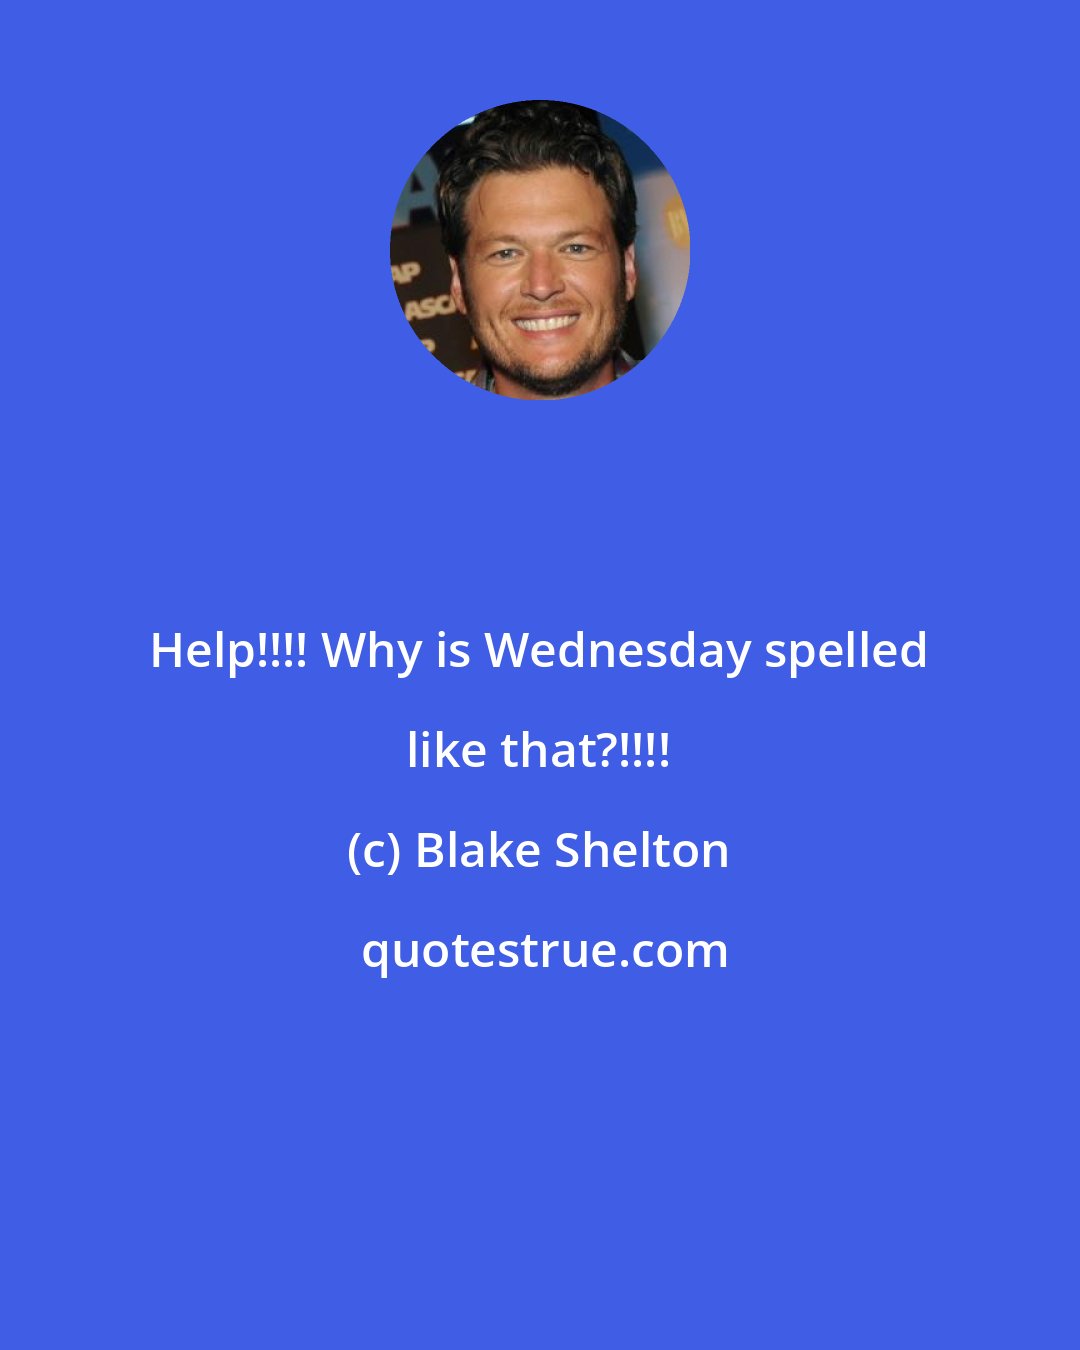 Blake Shelton: Help!!!! Why is Wednesday spelled like that?!!!!